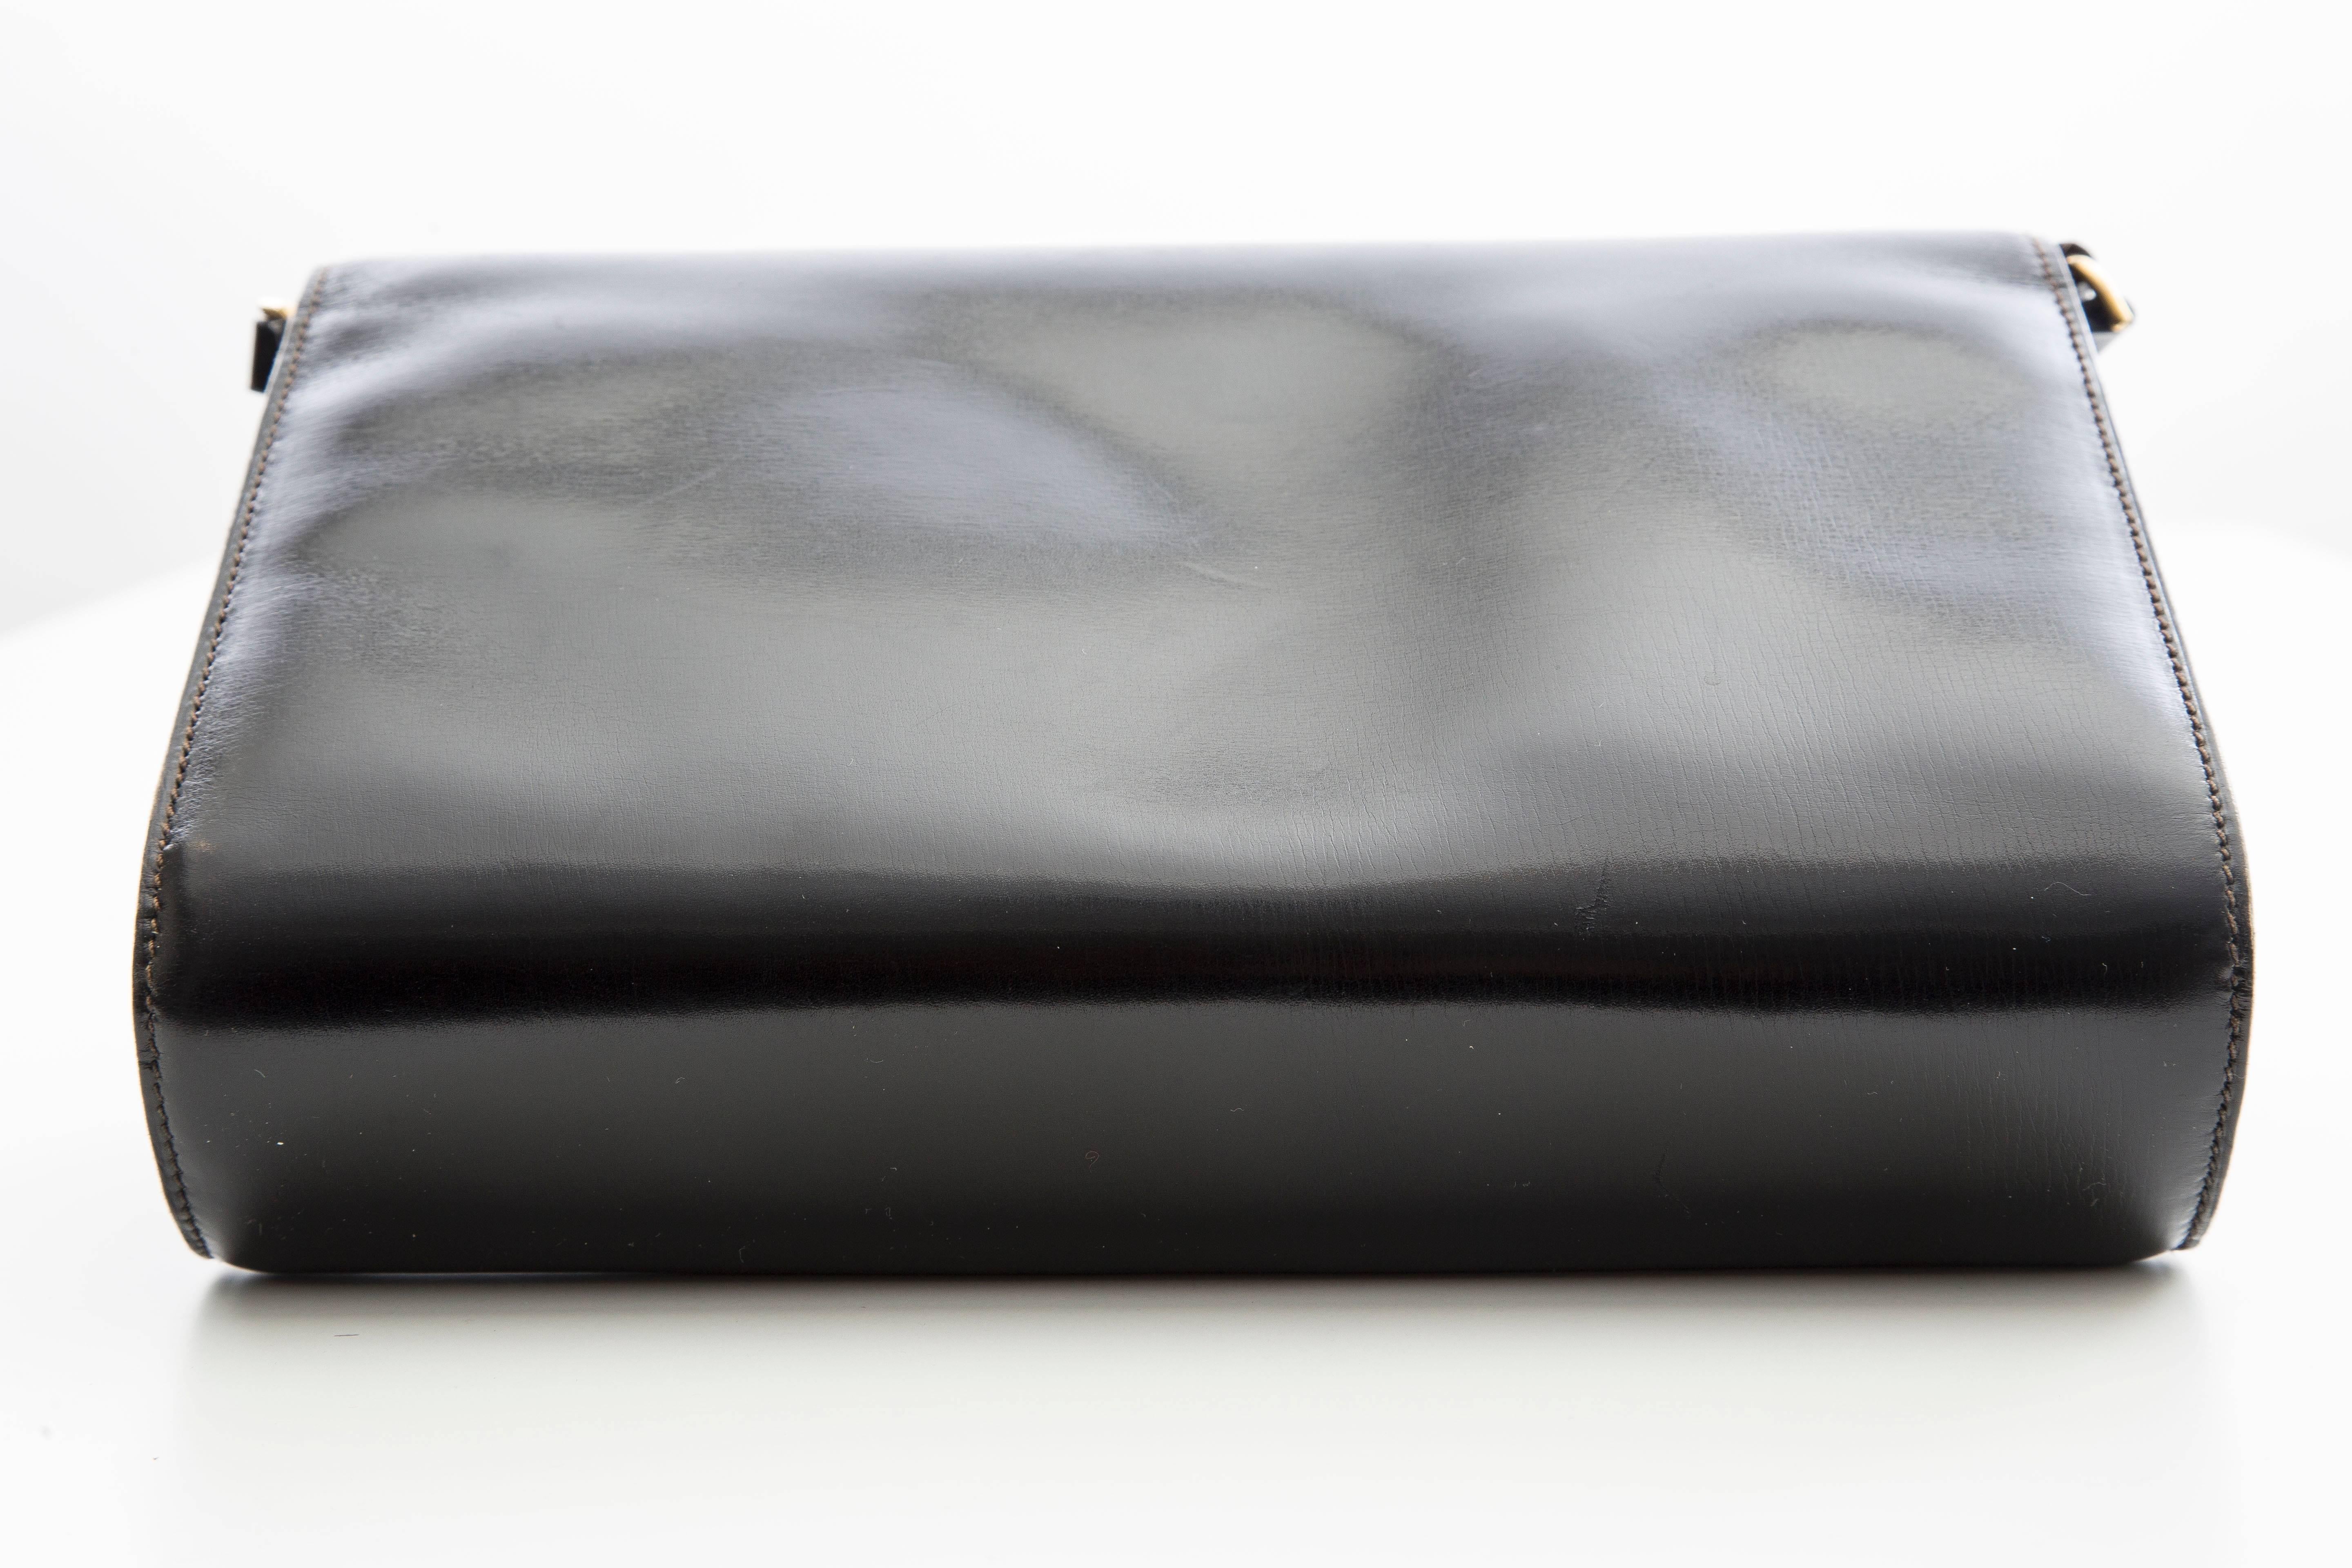 Gucci, circa 1970's, black leather clutch, interior pocket with detachable shoulder strap.

Serial Number: BO74